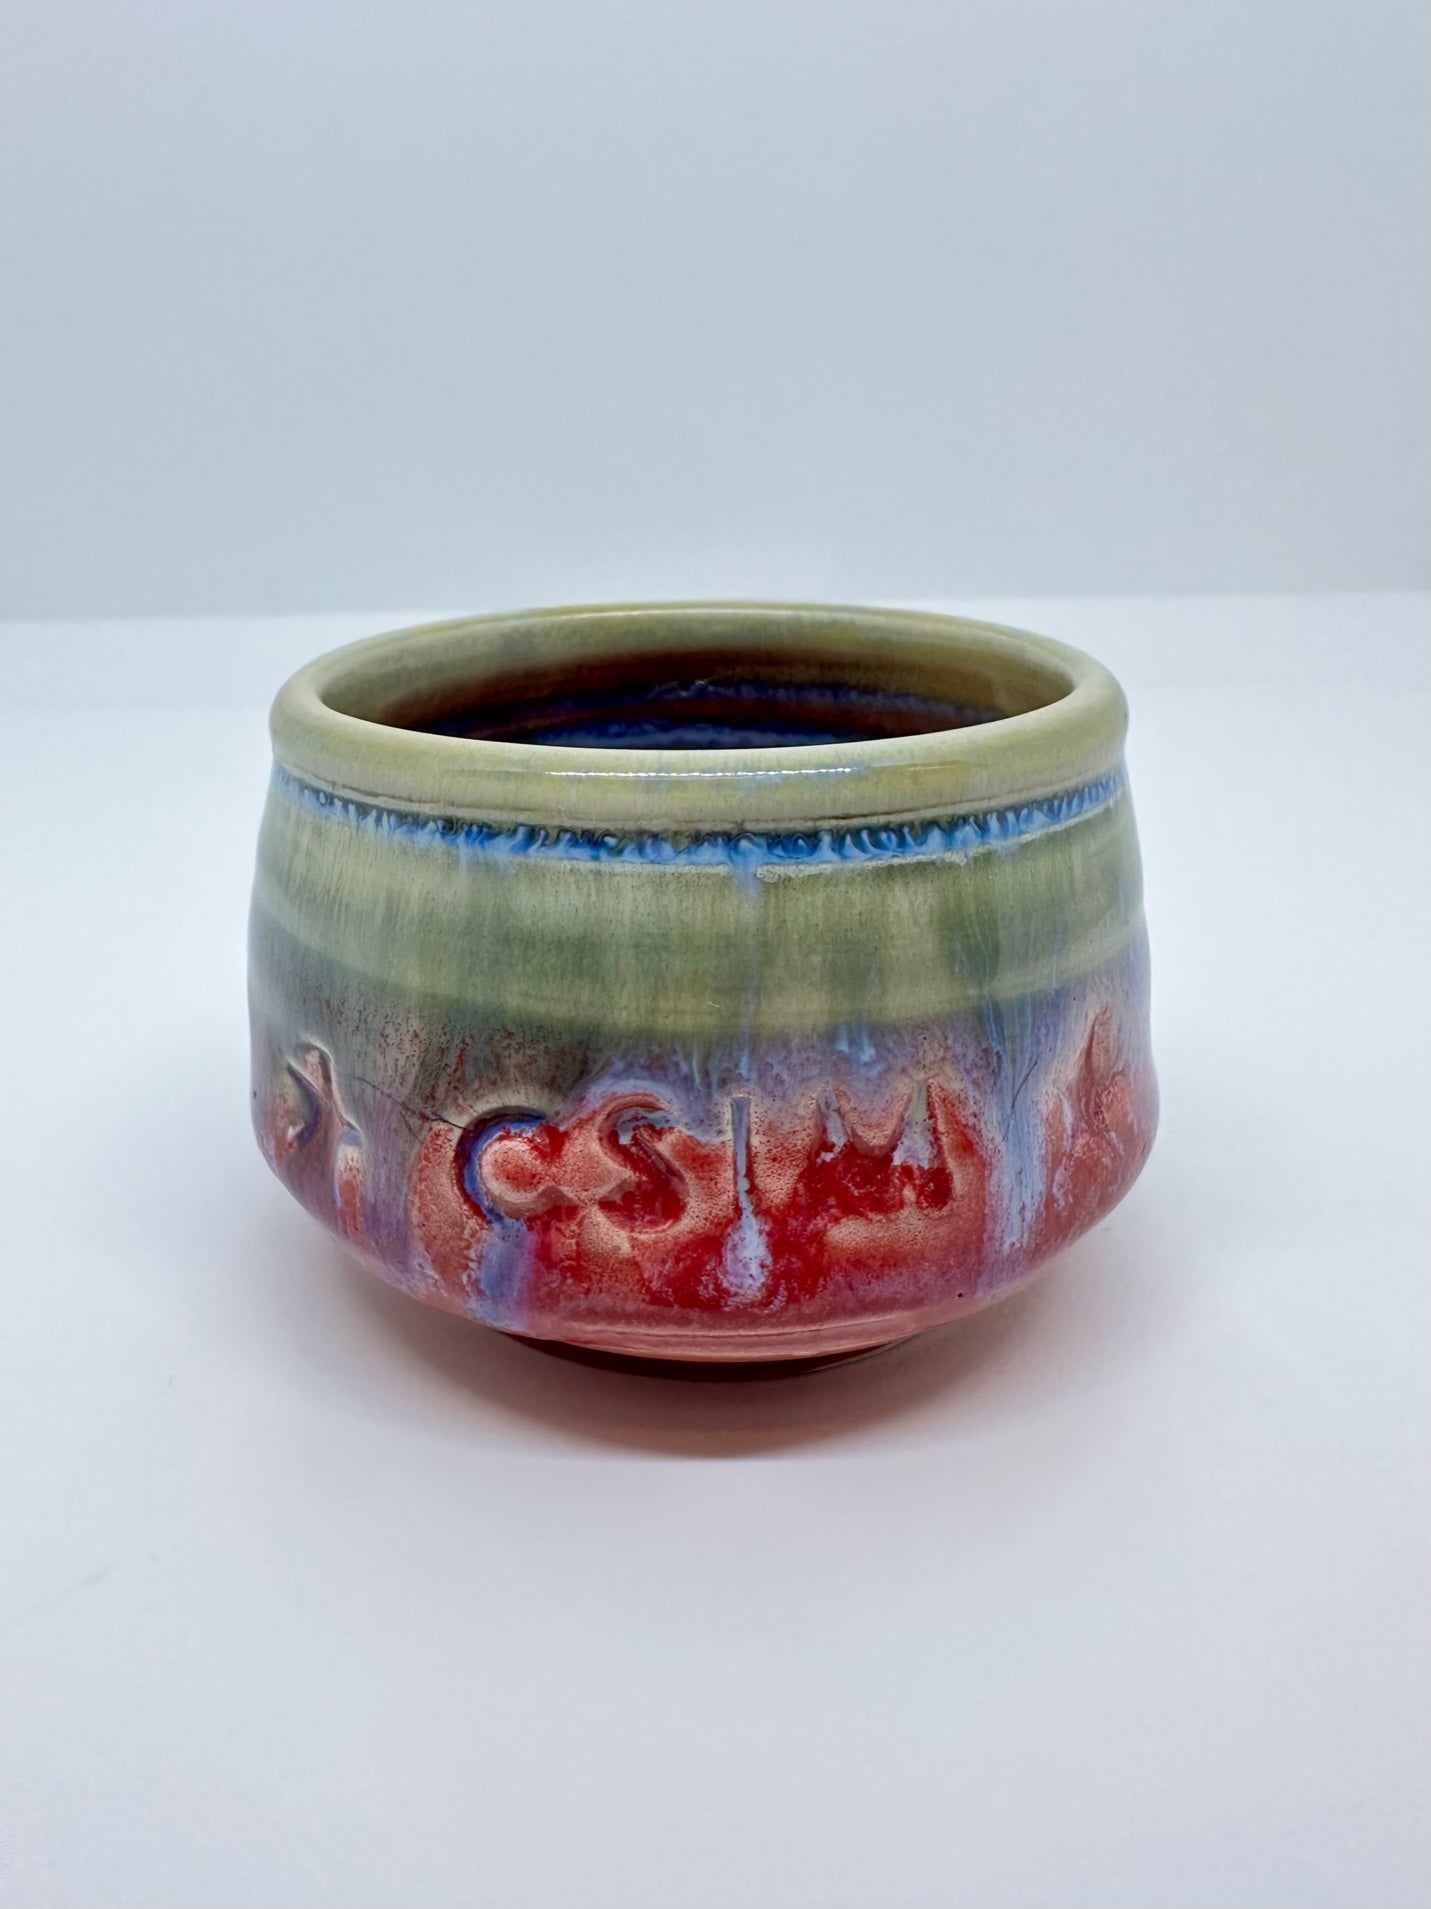 Handmade ‘Small Planter 2’ with CSM logo and colorful drippy glaze 